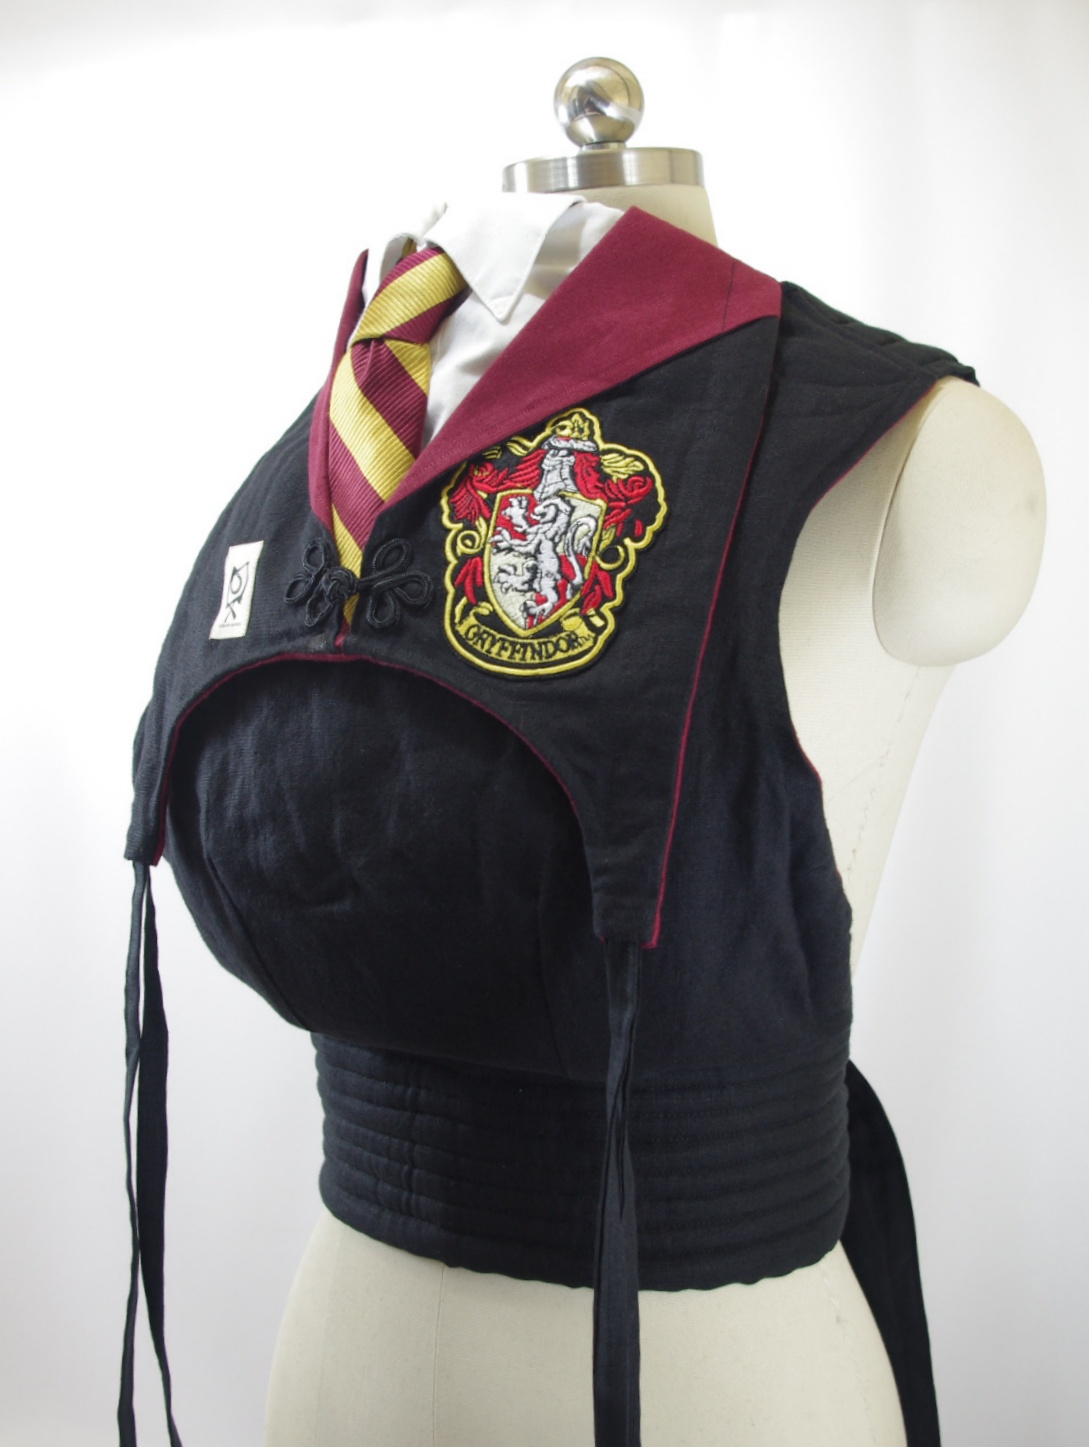 harry potter baby carrier